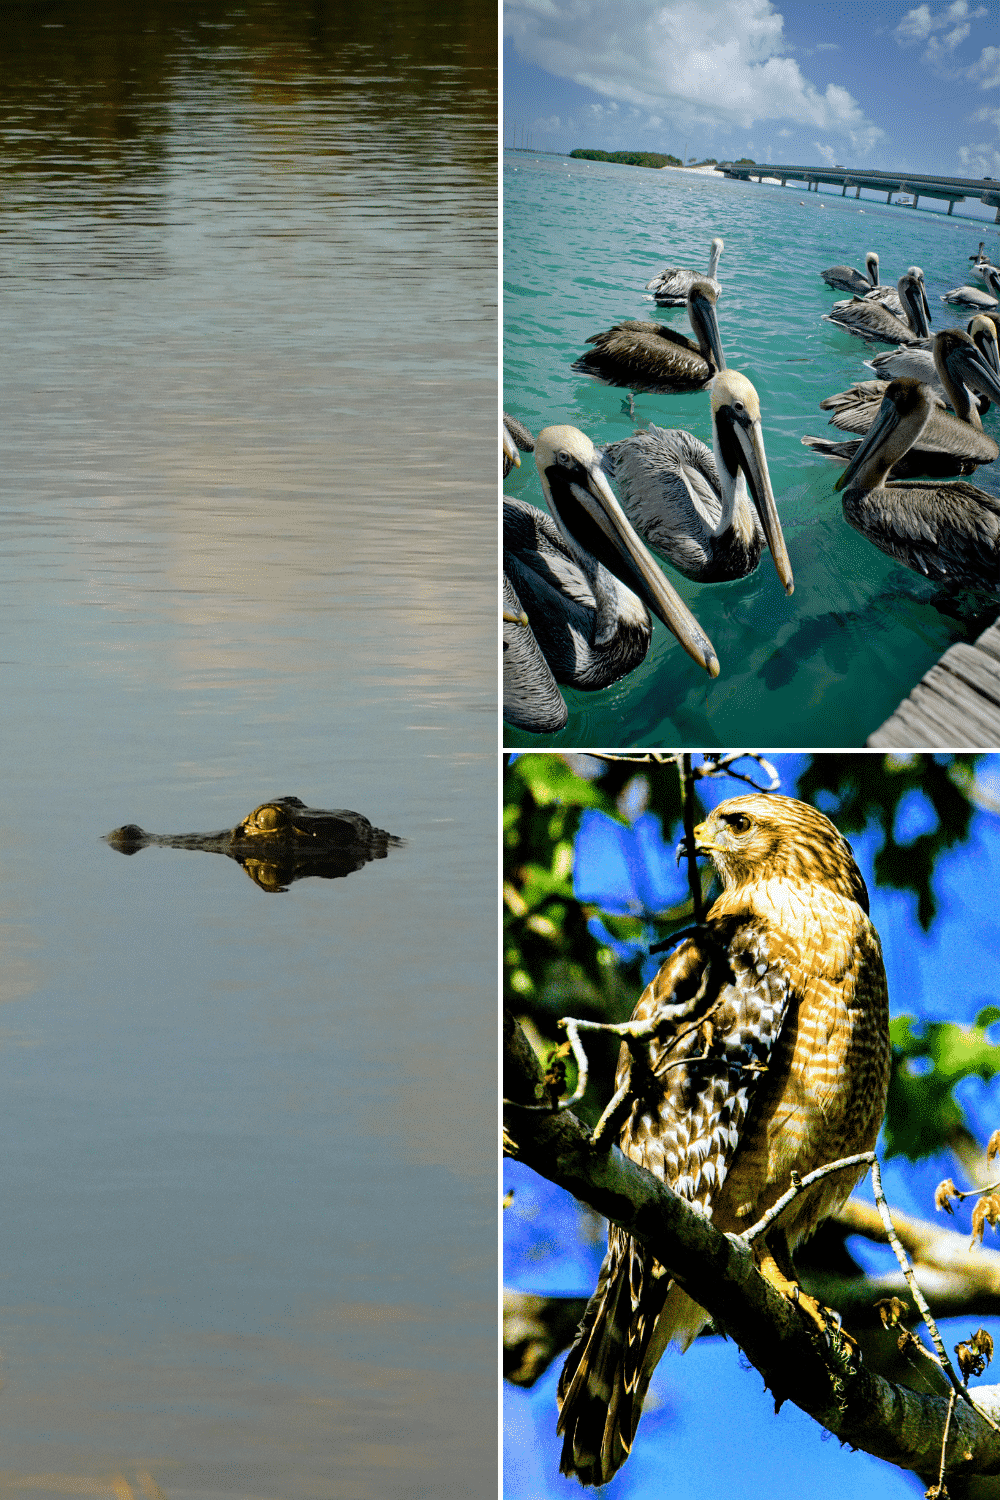 Florida photography locations with alligators and birds